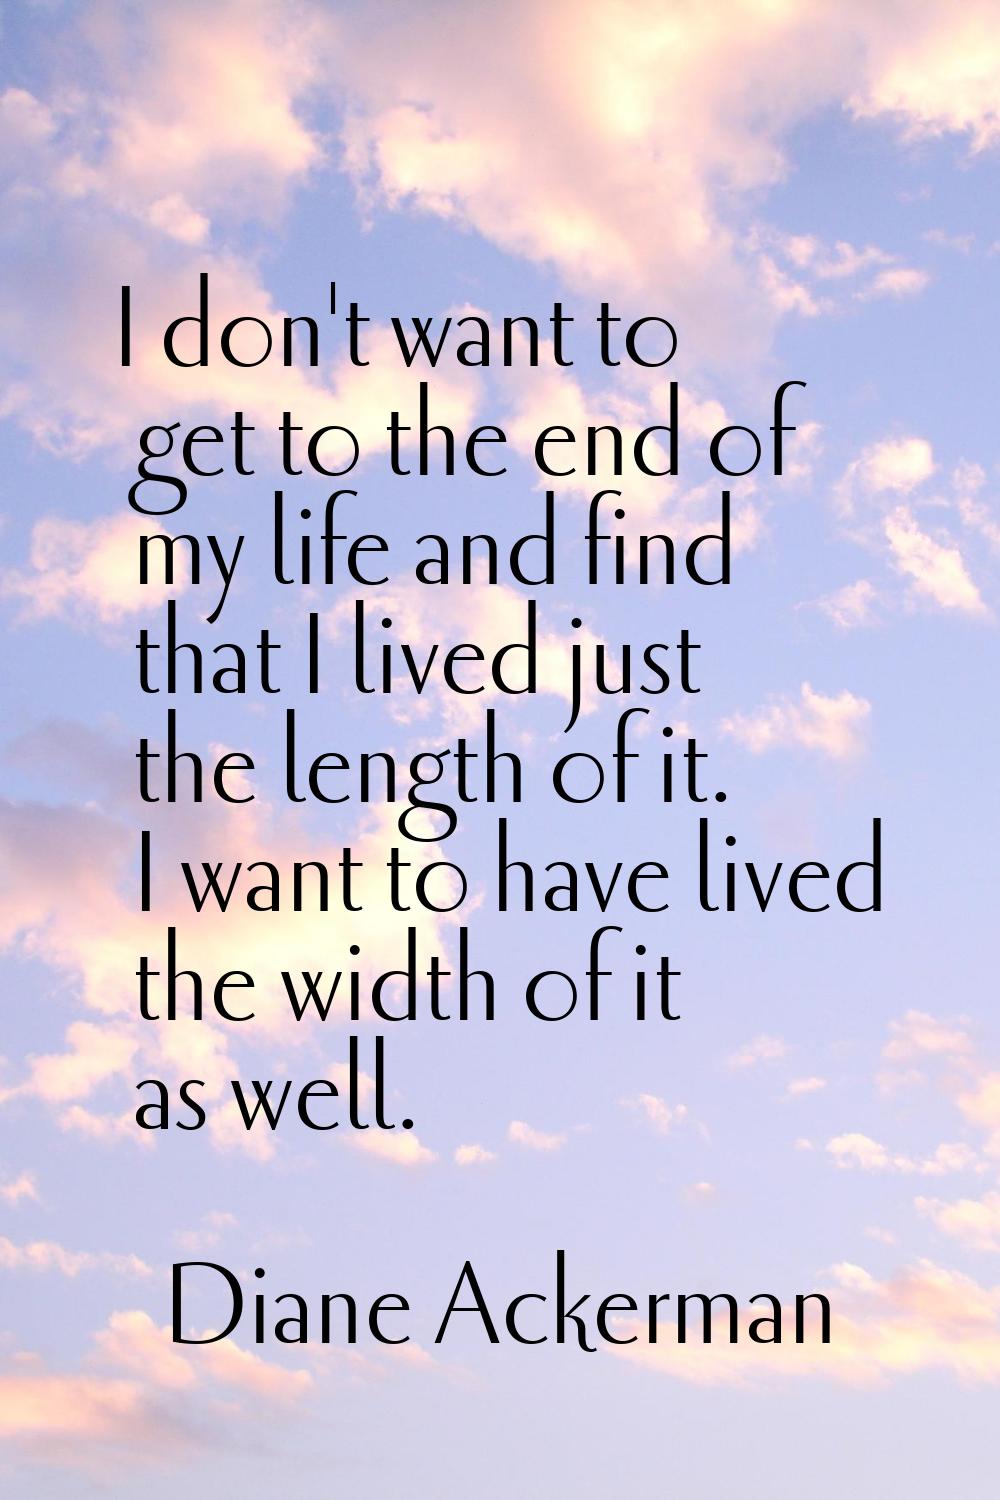 I don't want to get to the end of my life and find that I lived just the length of it. I want to ha